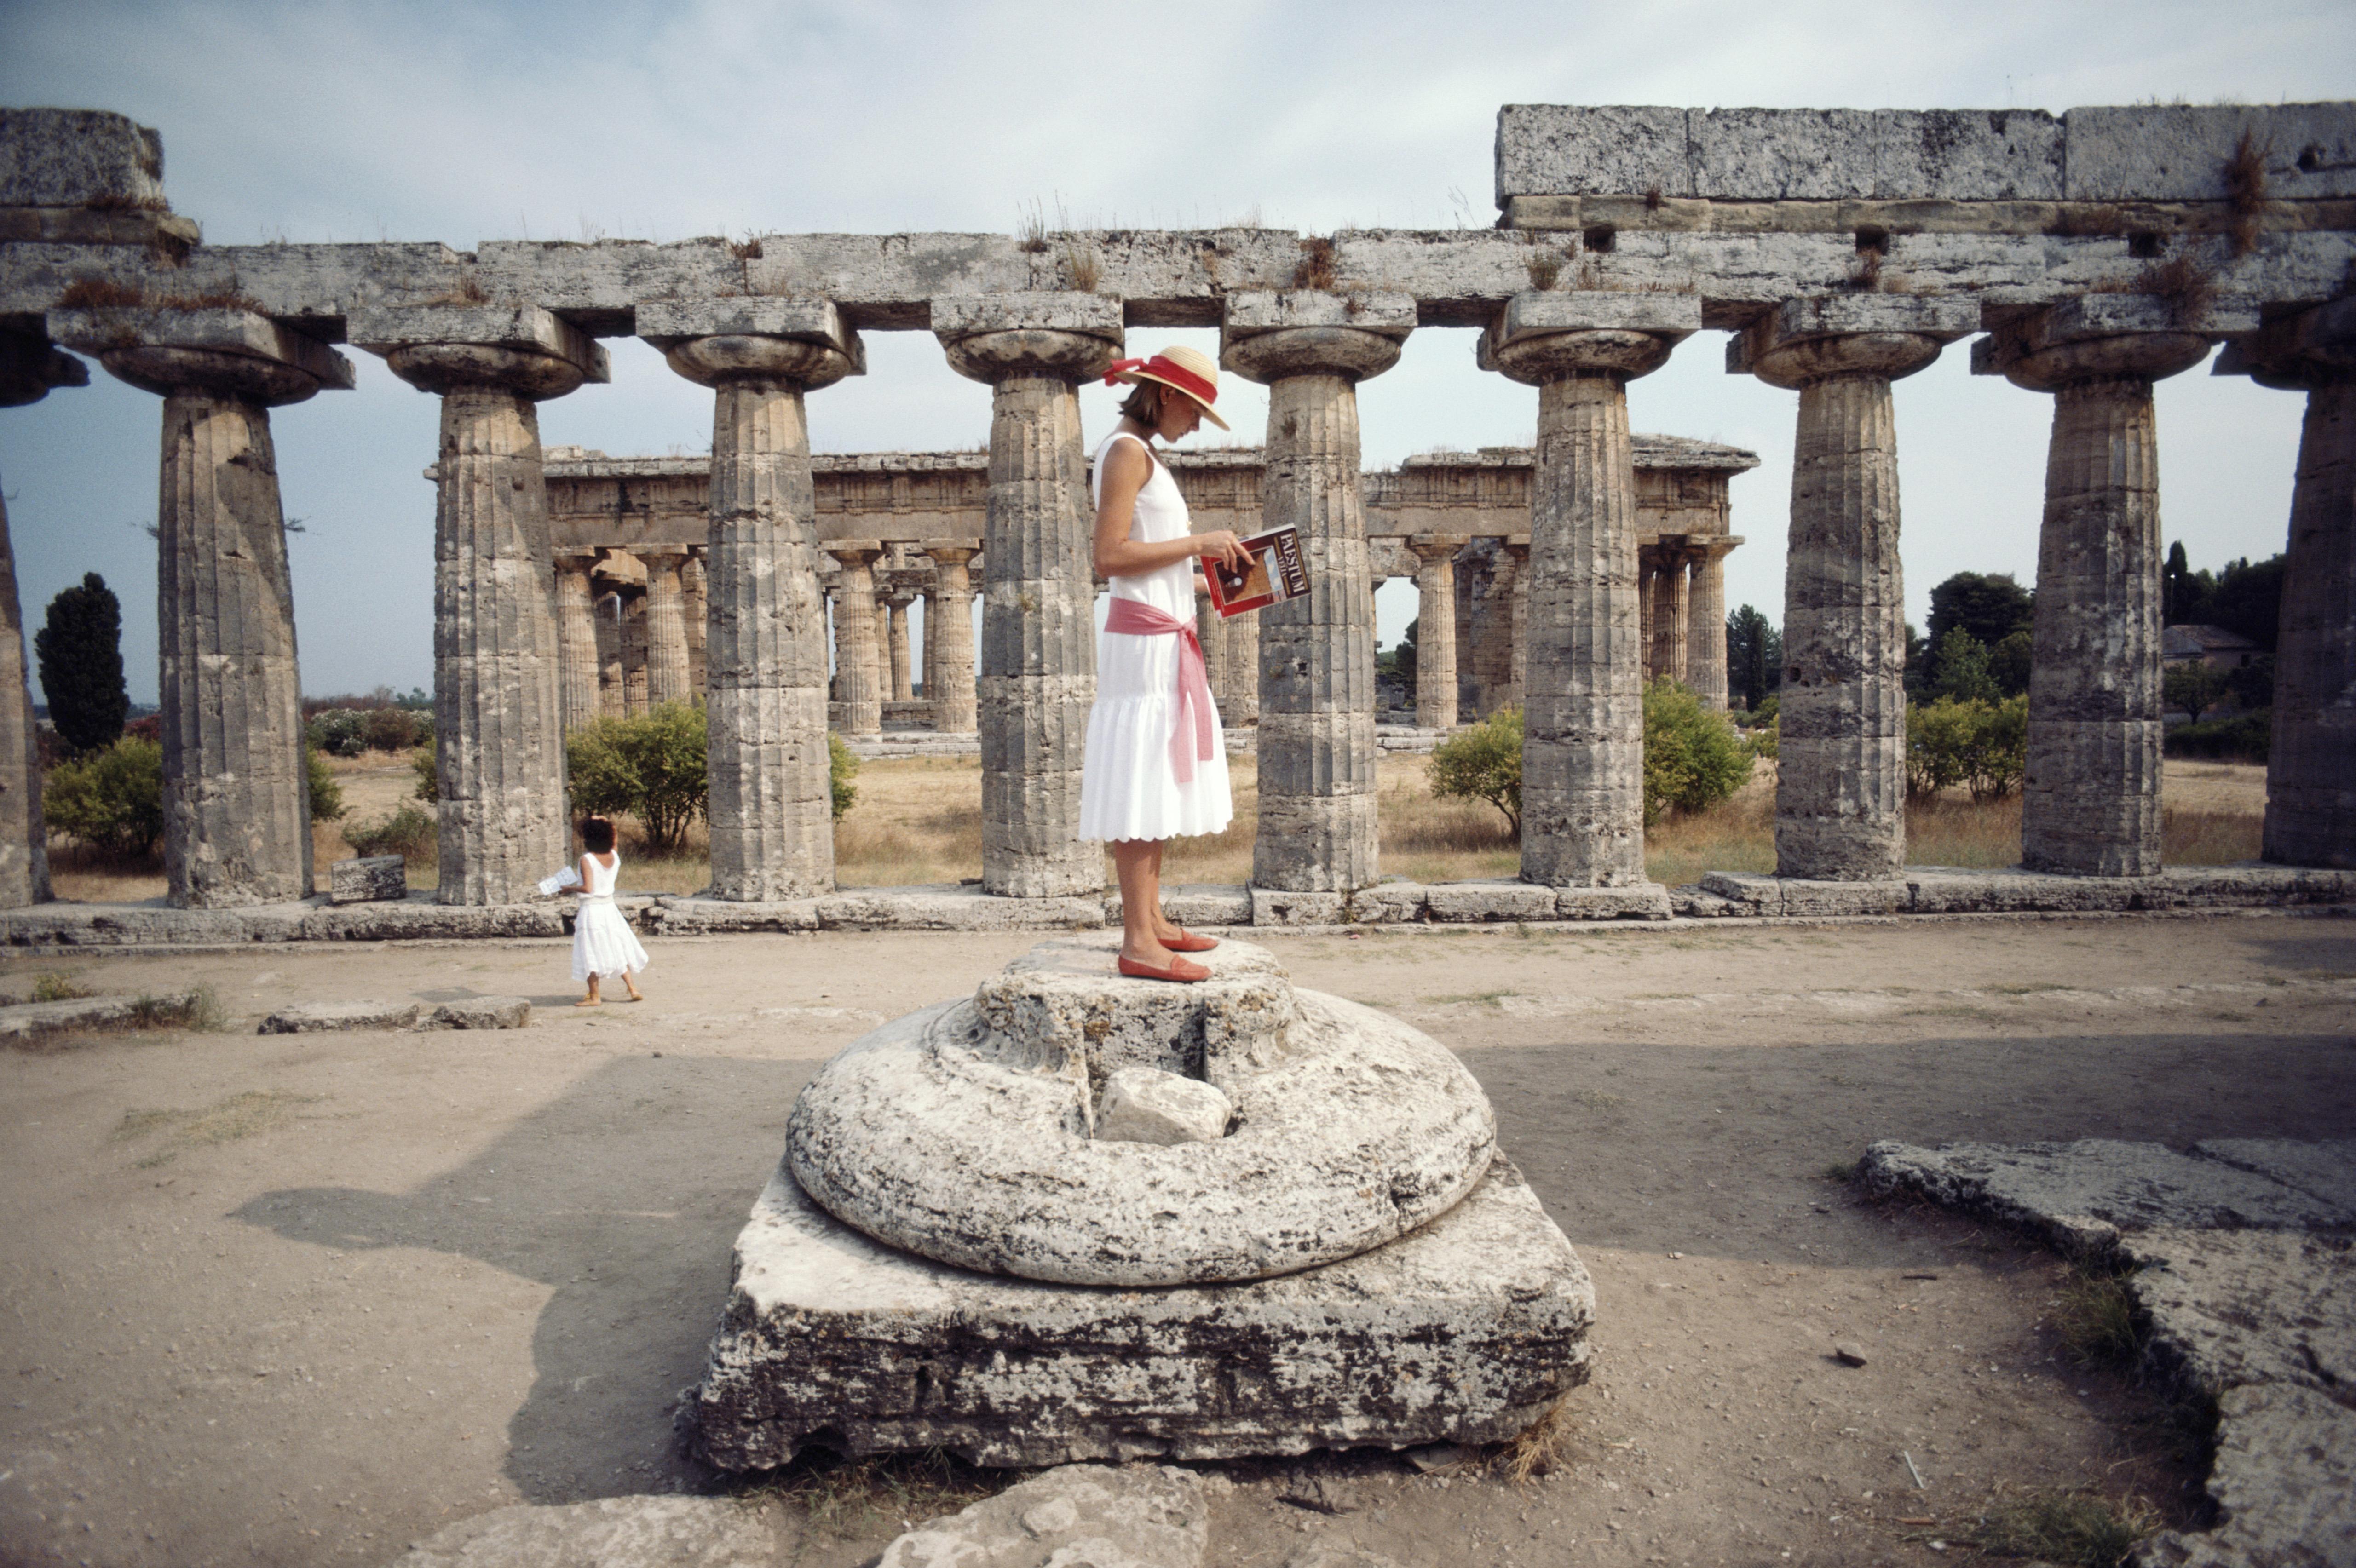 Laura Hawk, assistant to the photographer, poses reading a guide to Paestum while standing on the base of a broken column among the ruins of the Temple of Poseidon at Paestum, in the Campania region of Italy, in August 1984. 

C-type print from the